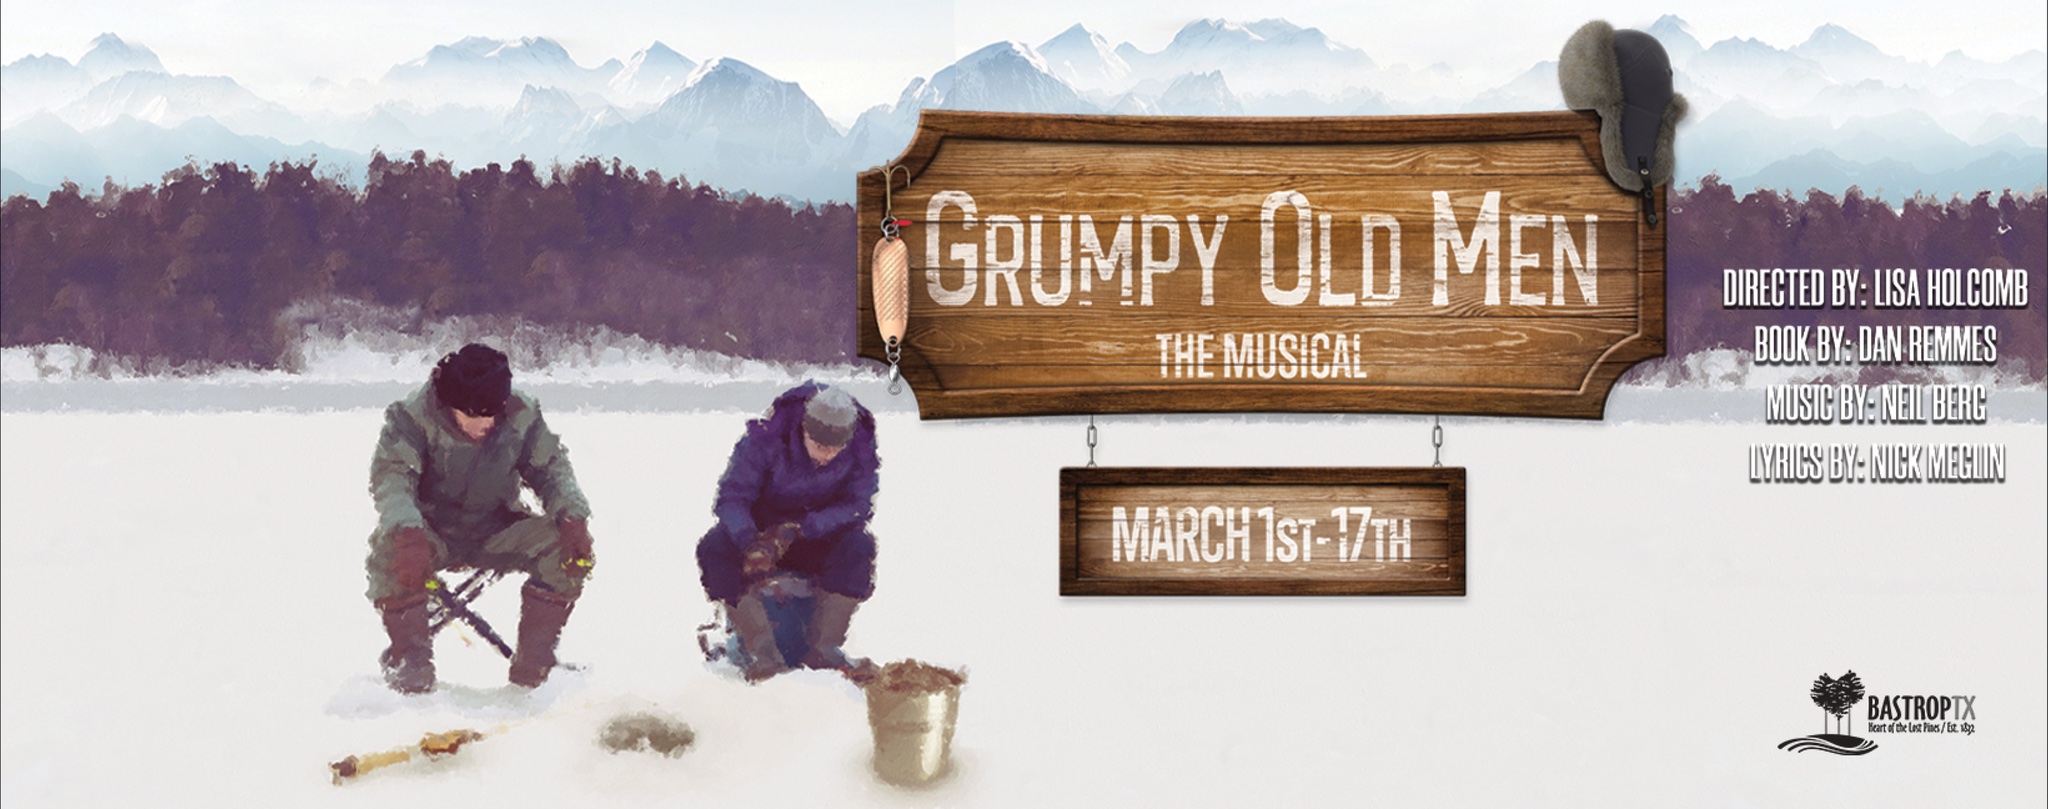 Grumpy Old Men, the musical by Bastrop Opera House